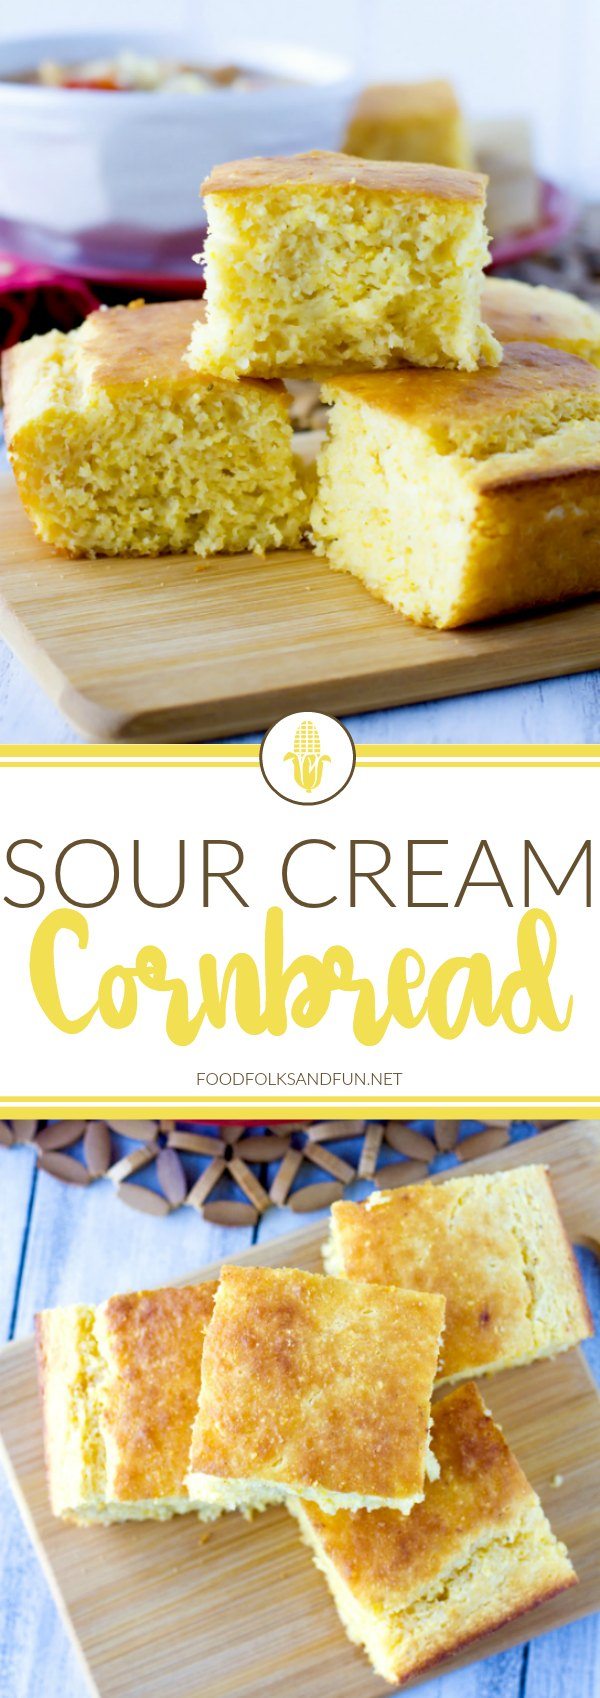 This Sour Cream Cornbread recipe is so moist, delicious, and not overly sweet. It’s super easy to make, and the entire family will LOVE it! via @foodfolksandfun